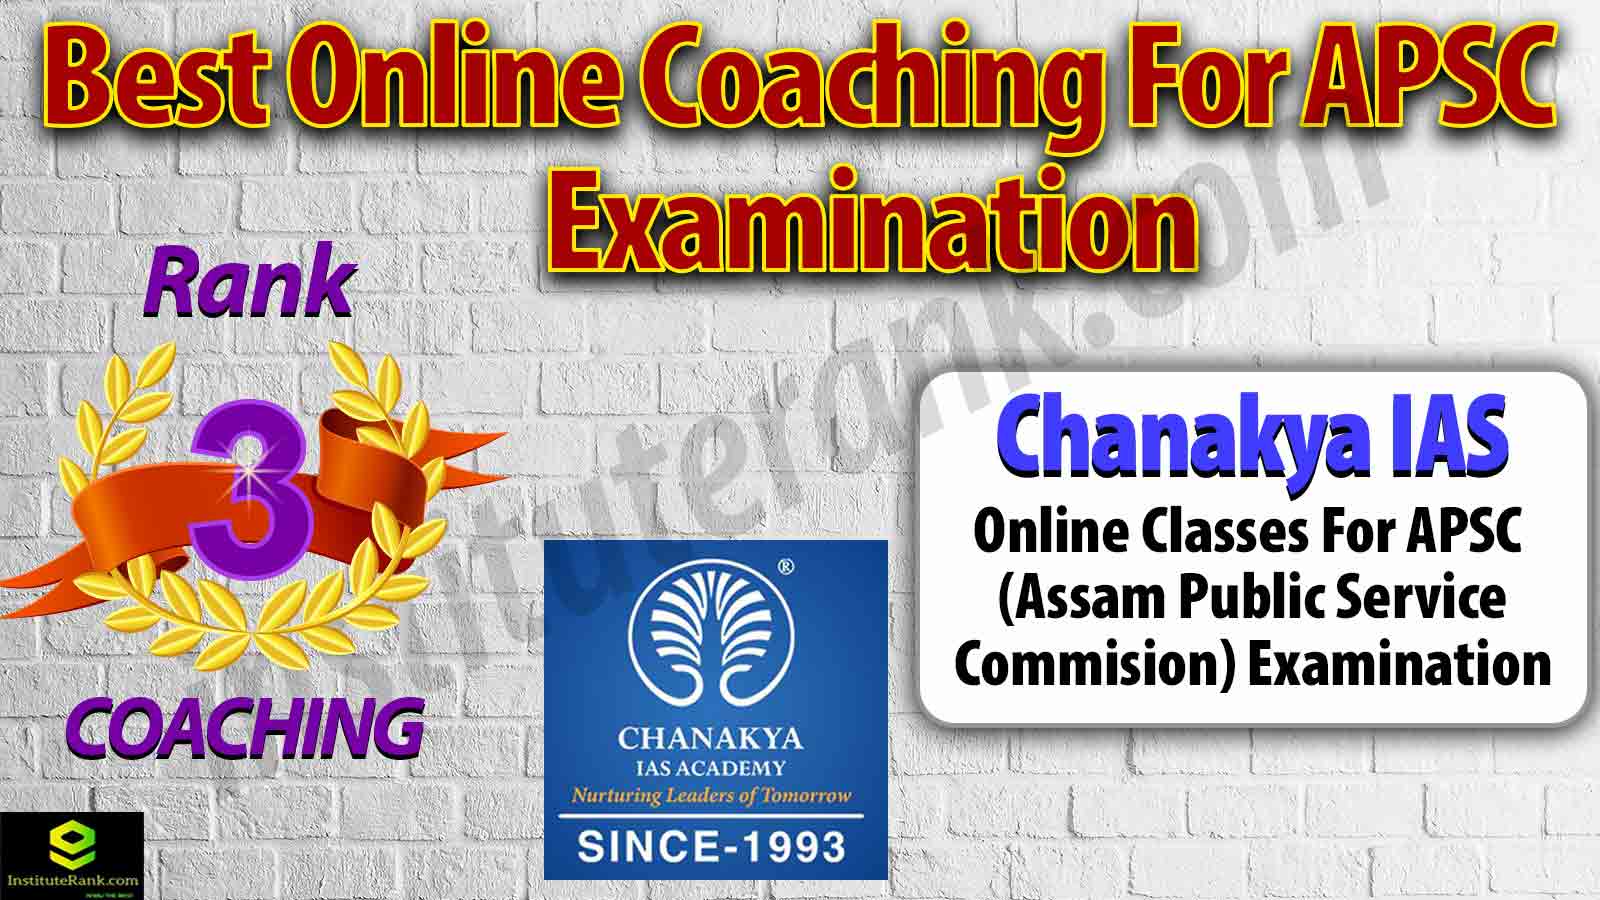 Top Online Coaching Centre for APSC Examination